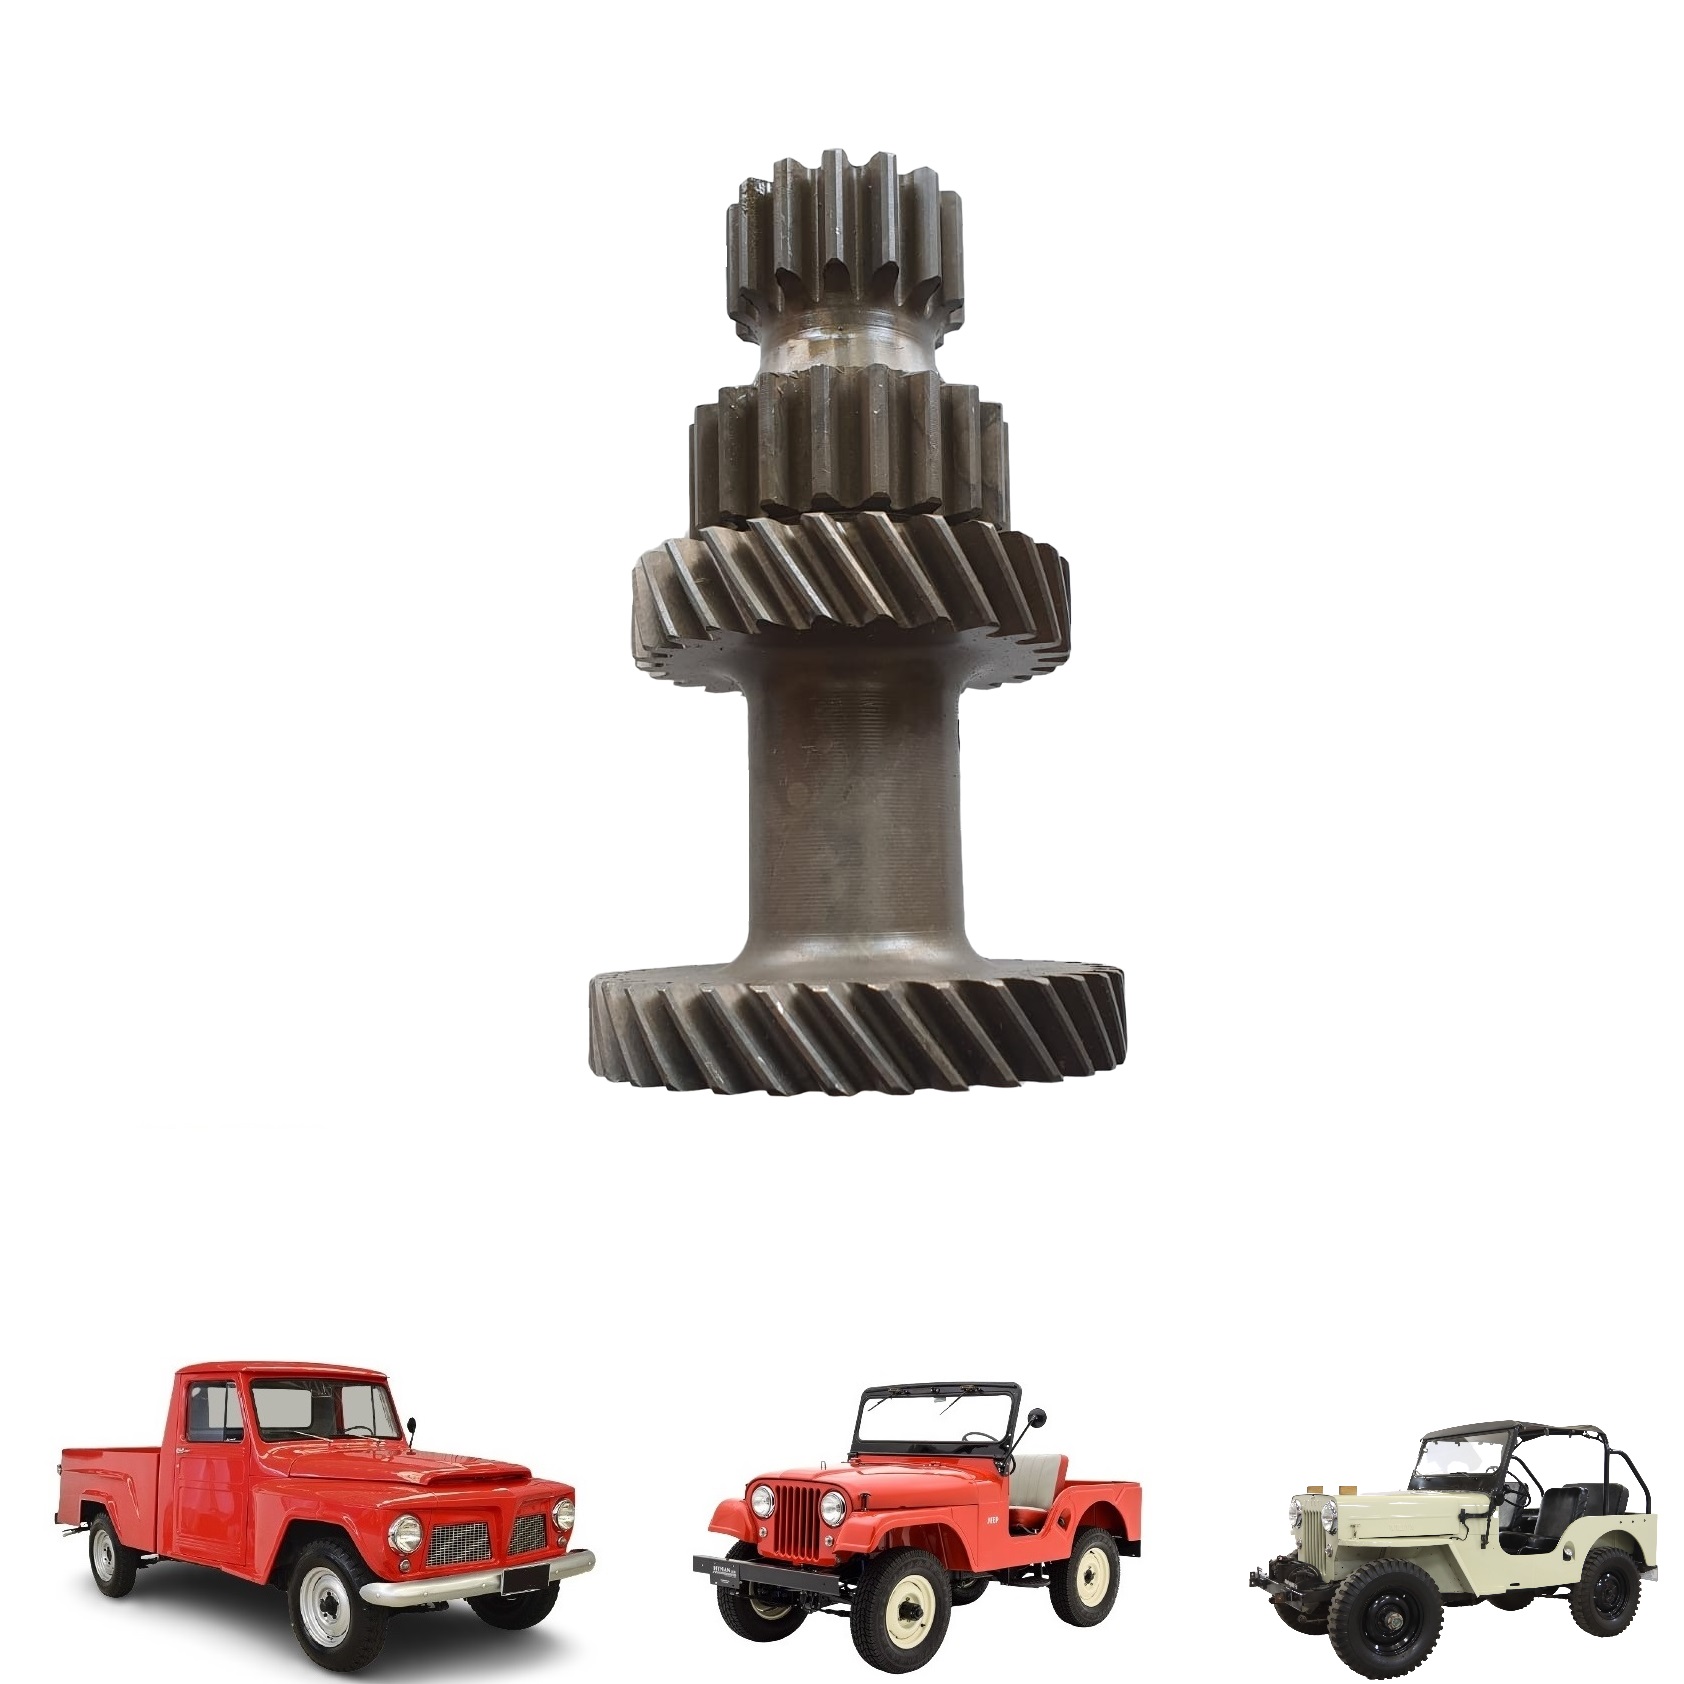 Carretel Do Câmbio 3 Marchas 1 Seca Jeep Rural F 75 Ford Willys